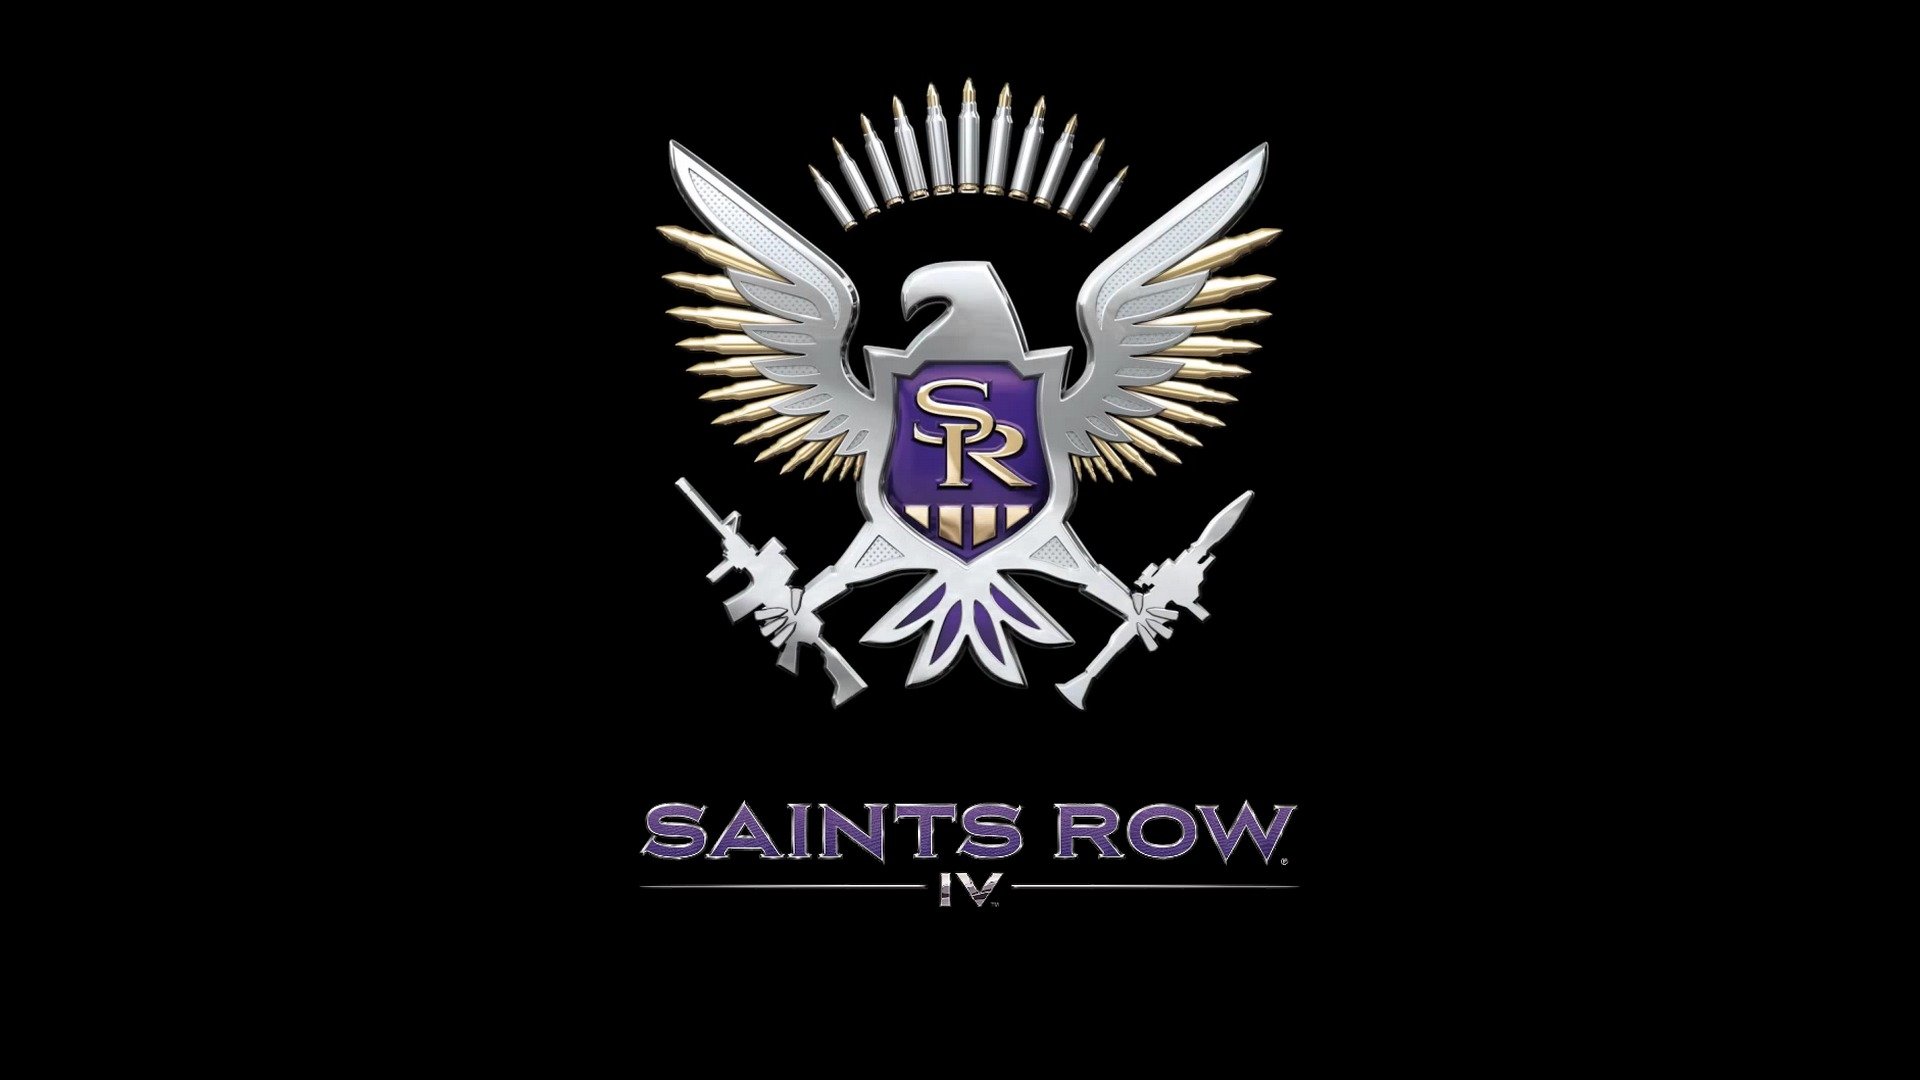 Saints Row IV Wallpaper 1920x1080 By Friesgamer by FriesGamer 1920x1080